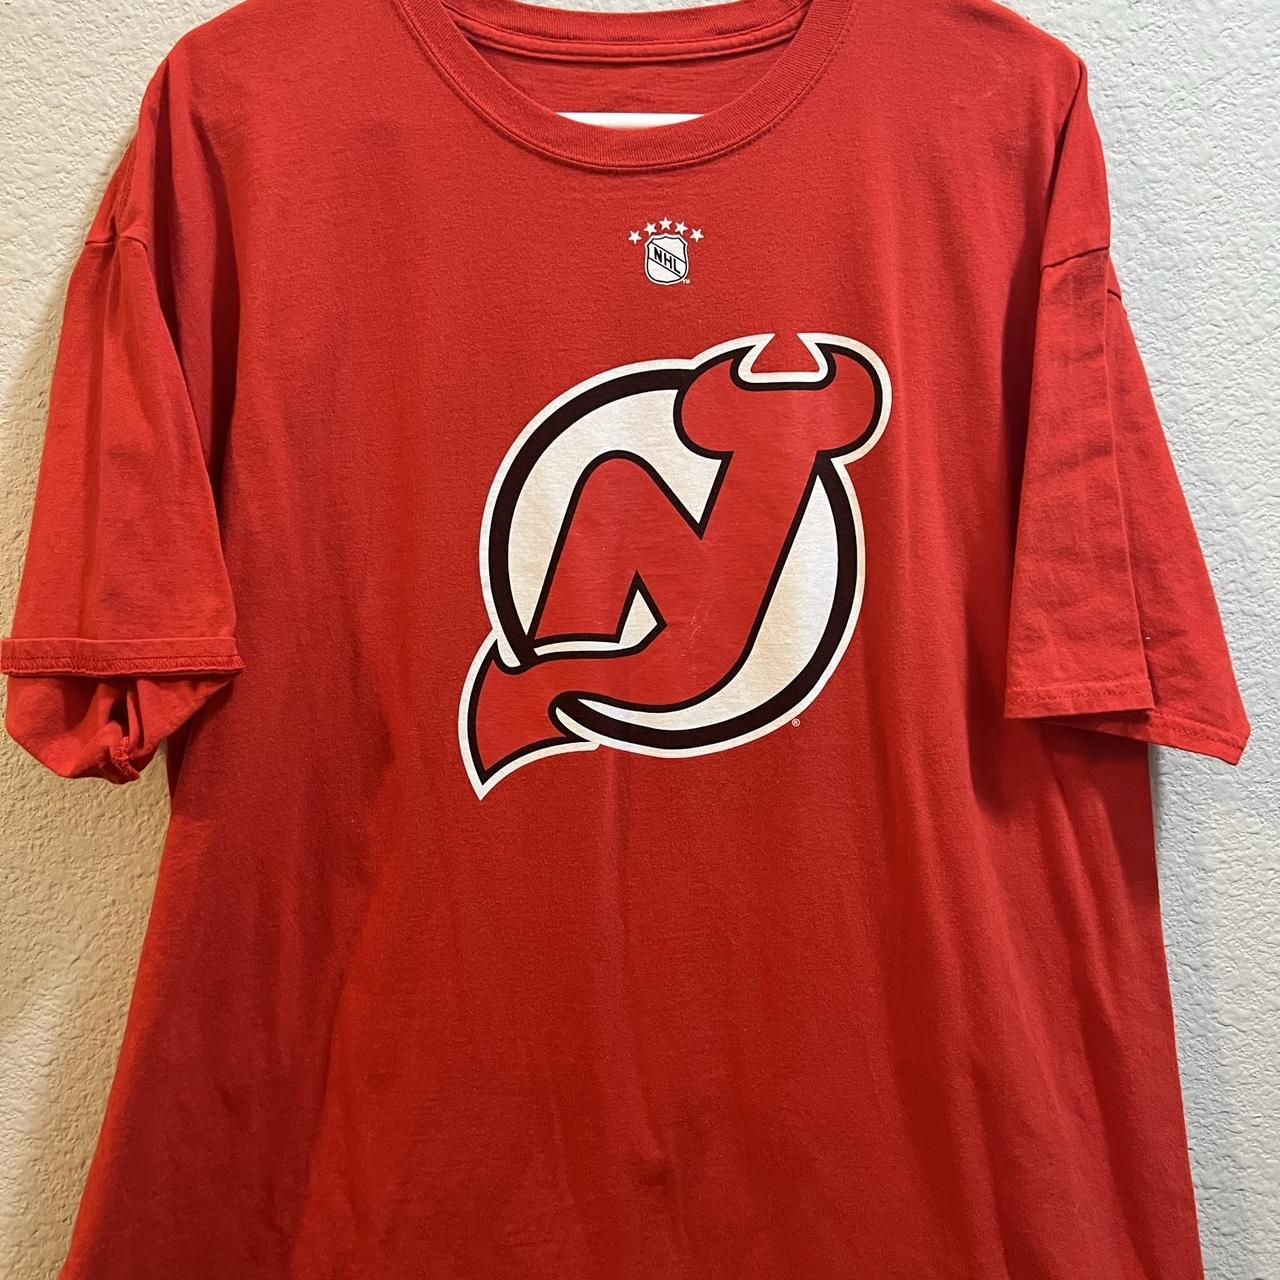 Lil Peep New Jersey Devils jersey similar to the one - Depop